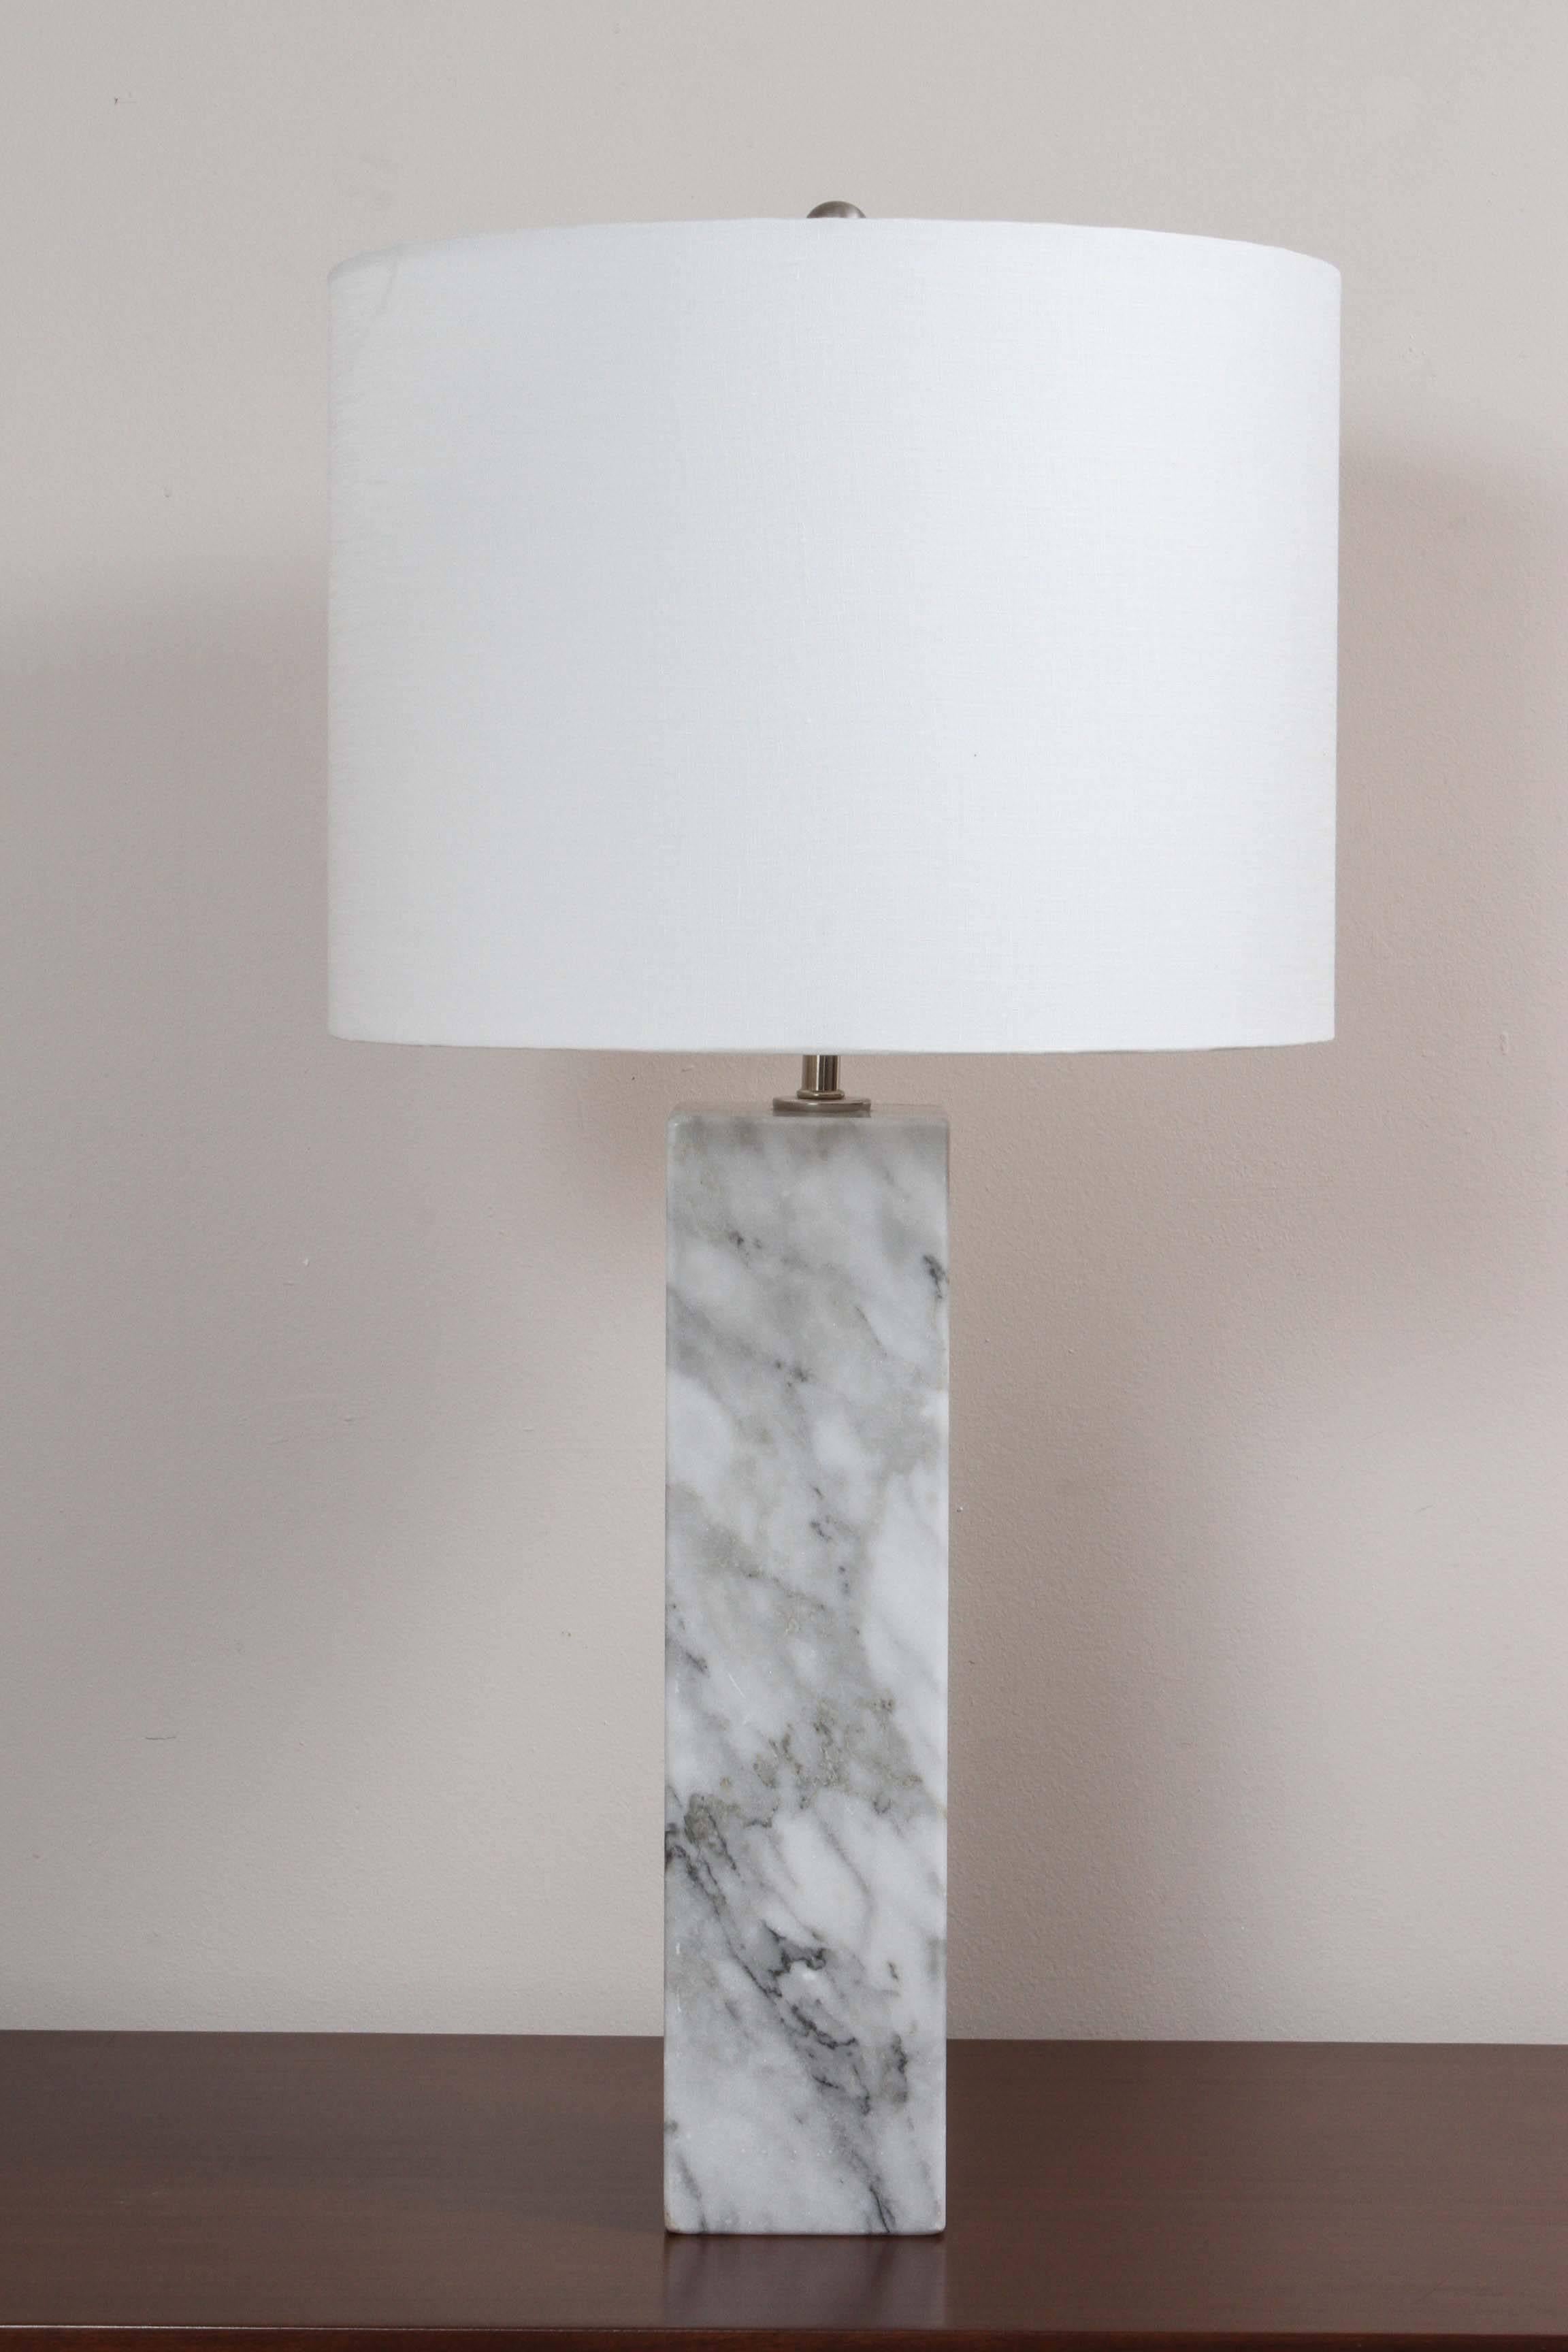 Pair of 1960s Carrera marble table lamps. The lamps are stately and solid/heavy. The drum shade is linen and new. Markings on the marble are beautifully appointed. 